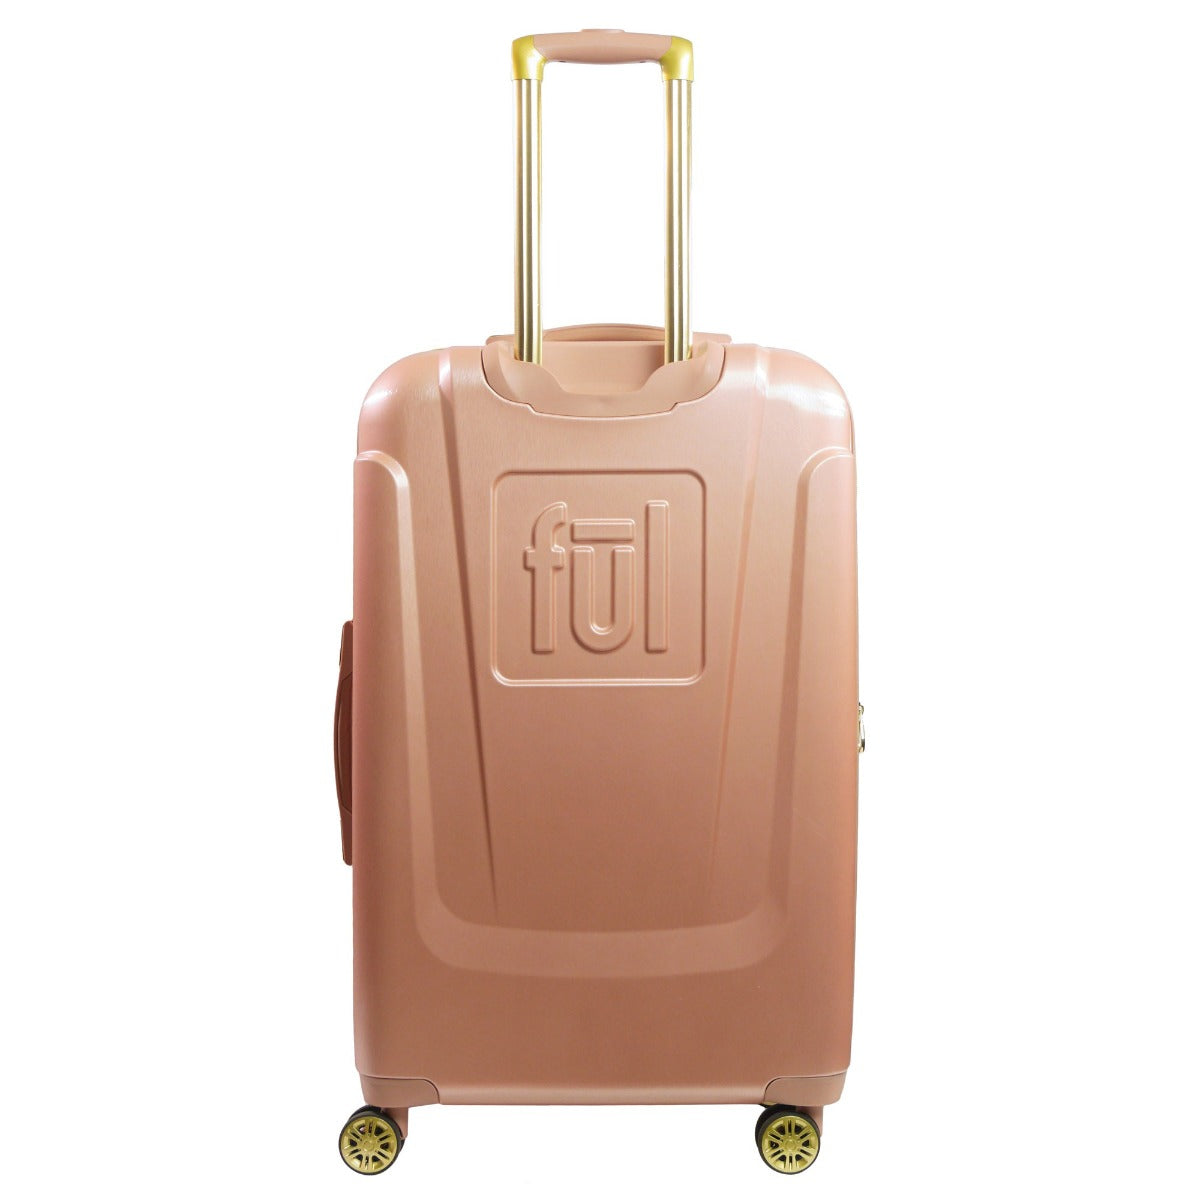 Disney Running Mickey 30.5 inch hardsided Spinner Luggage Rose Gold checked suitcase retractable handle handle 